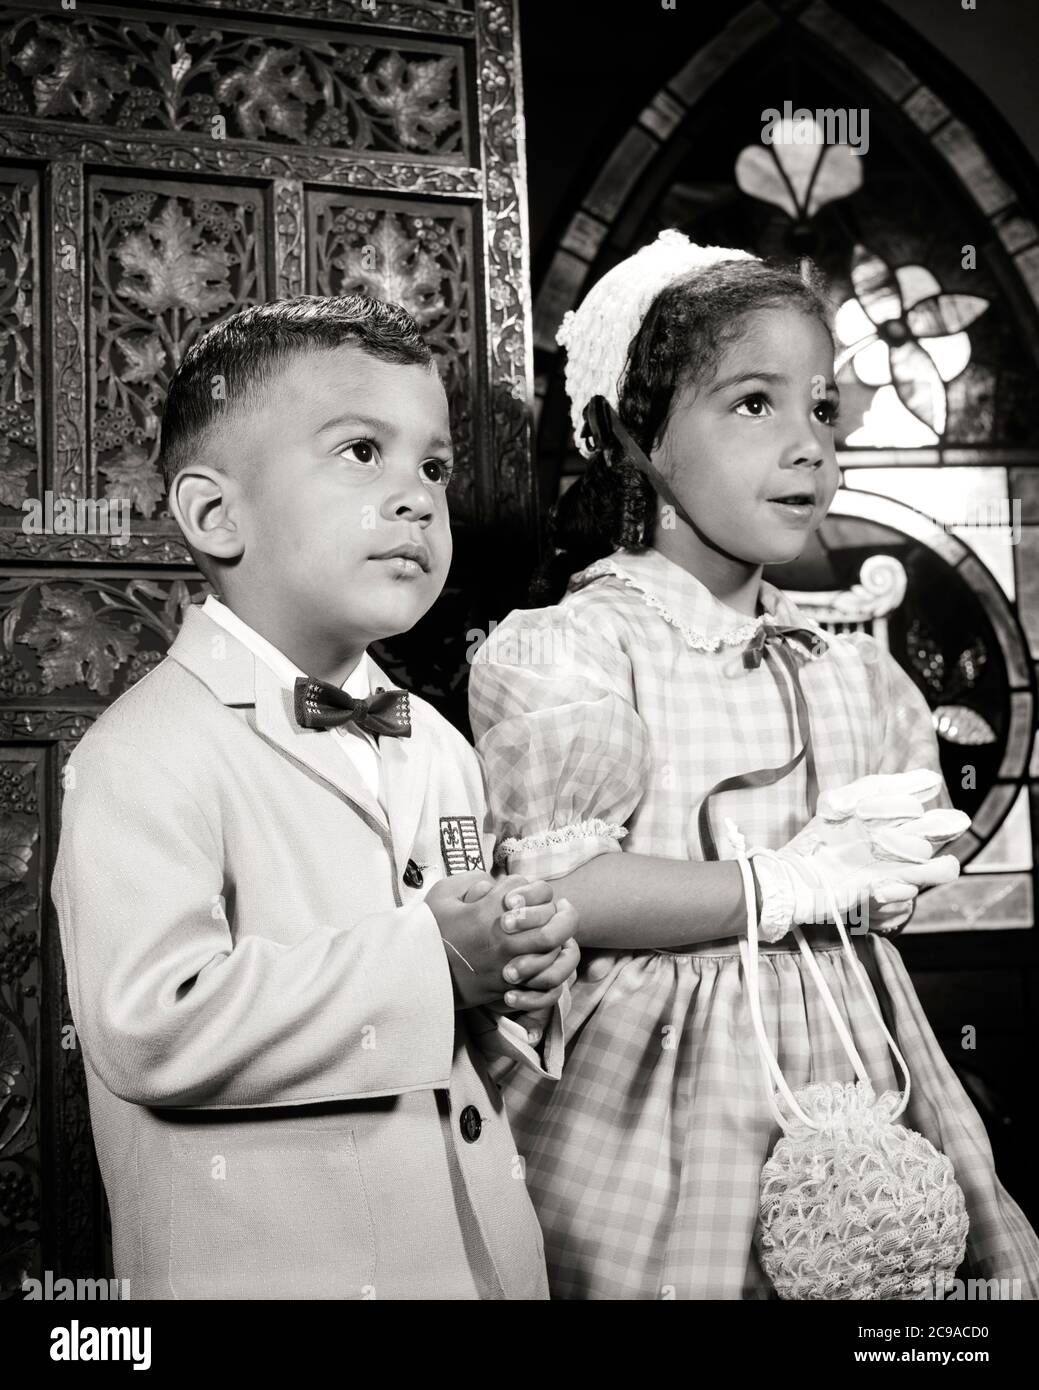 1960s TWO WELL DRESSED AFRICAN-AMERICAN CHILDREN BOY GIRL SISTER BROTHER ATTENDING CHURCH PRAYING TOGETHER - n1730 HAR001 HARS FEMALES SUNDAY BROTHERS PRAYER HOME LIFE COPY SPACE HALF-LENGTH INSPIRATION CARING MALES CHRISTIAN SIBLINGS SPIRITUALITY SISTERS B&W DREAMS HAPPINESS RELIGIOUS AFRICAN-AMERICANS AFRICAN-AMERICAN CHRISTIANITY PRAY BLACK ETHNICITY PRIDE SIBLING CONCEPTUAL STYLISH FAITHFUL FAITH GROWTH JUVENILES SPIRITUAL TOGETHERNESS BELIEF BLACK AND WHITE HAR001 INSPIRATIONAL OLD FASHIONED AFRICAN AMERICANS Stock Photo